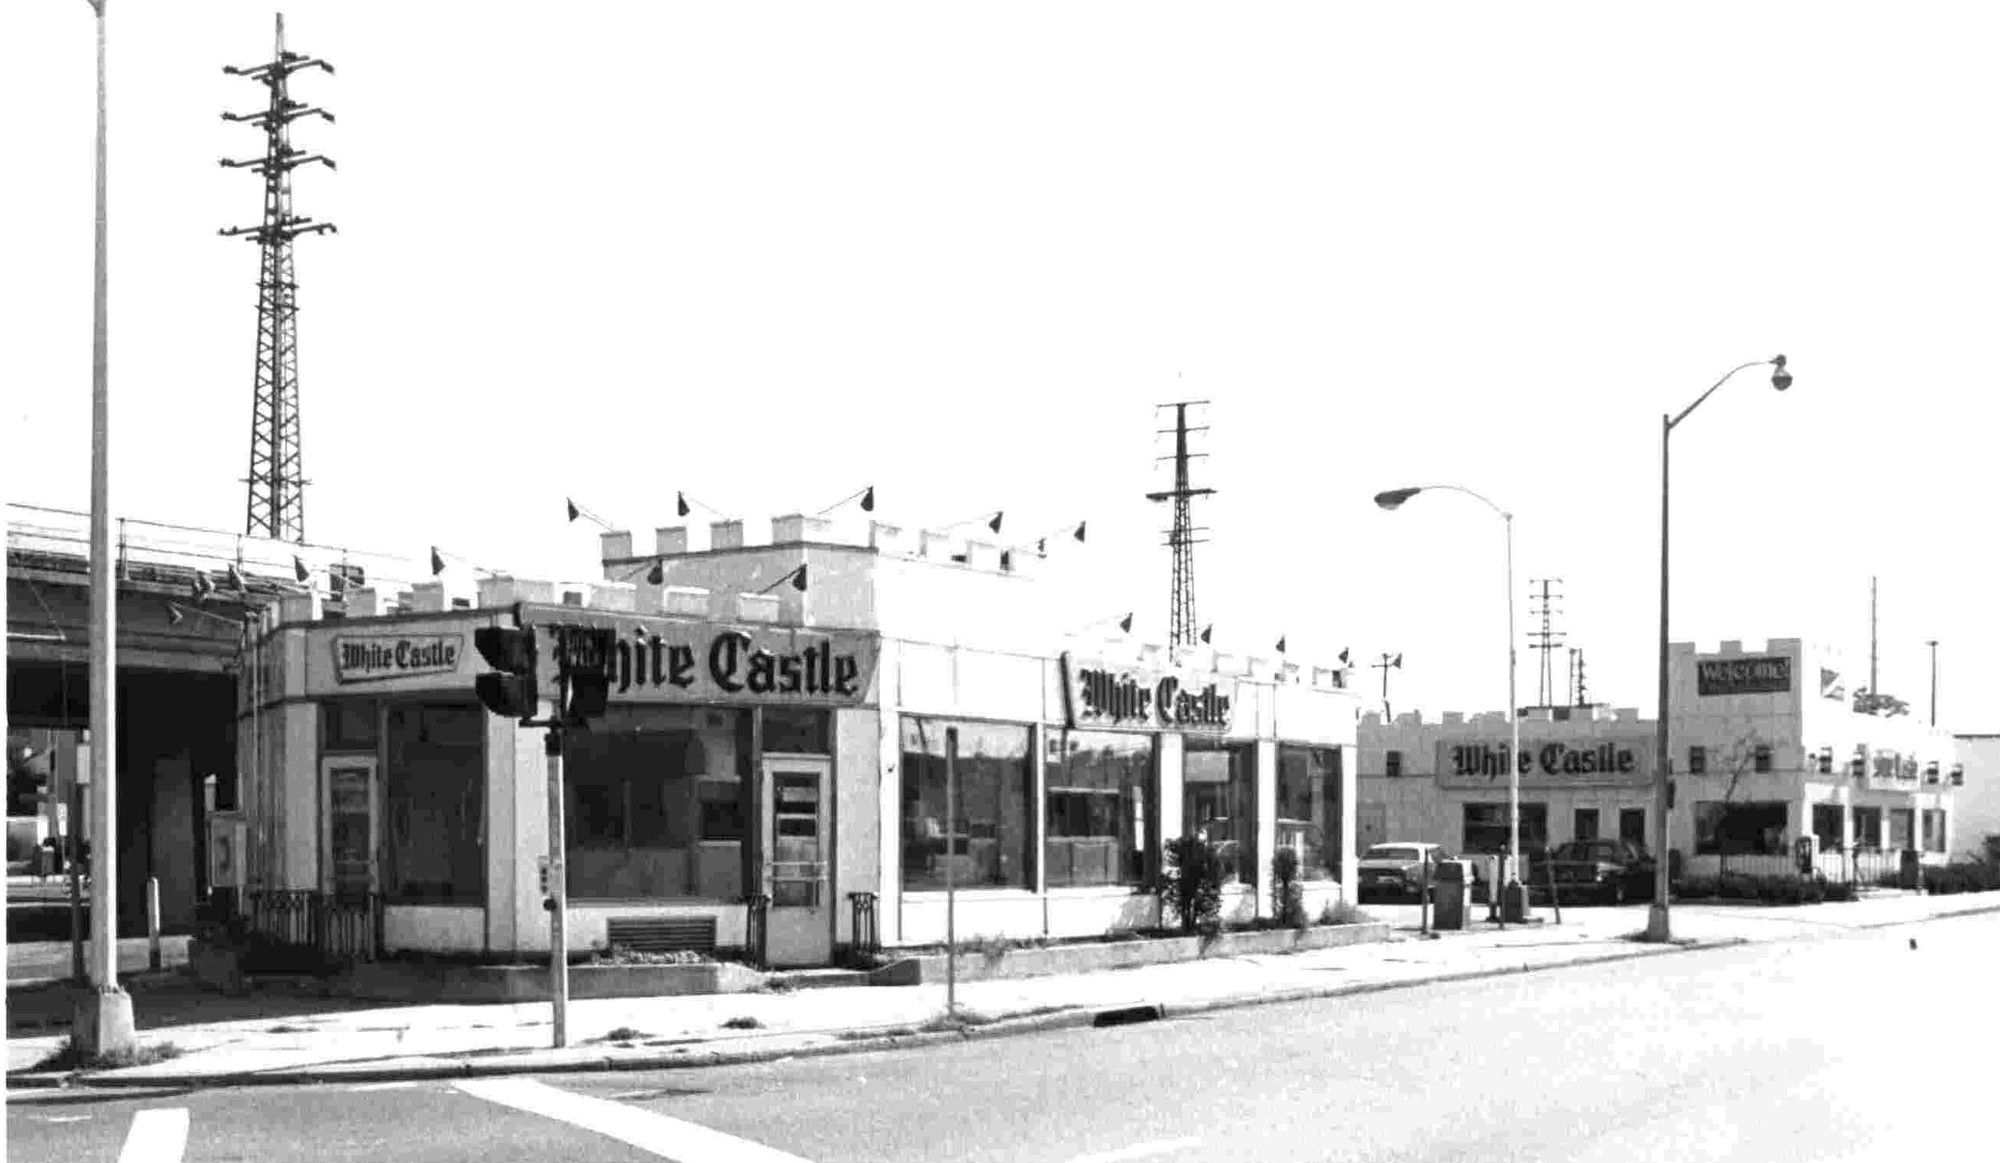 The ‘Two White Castles’ was taken by Lynbrook photographer John Cribbin, probably in the late sixties or early seventies. It depicts the old structure in the foreground being replaced by the new one to the rear (right) of the photo.